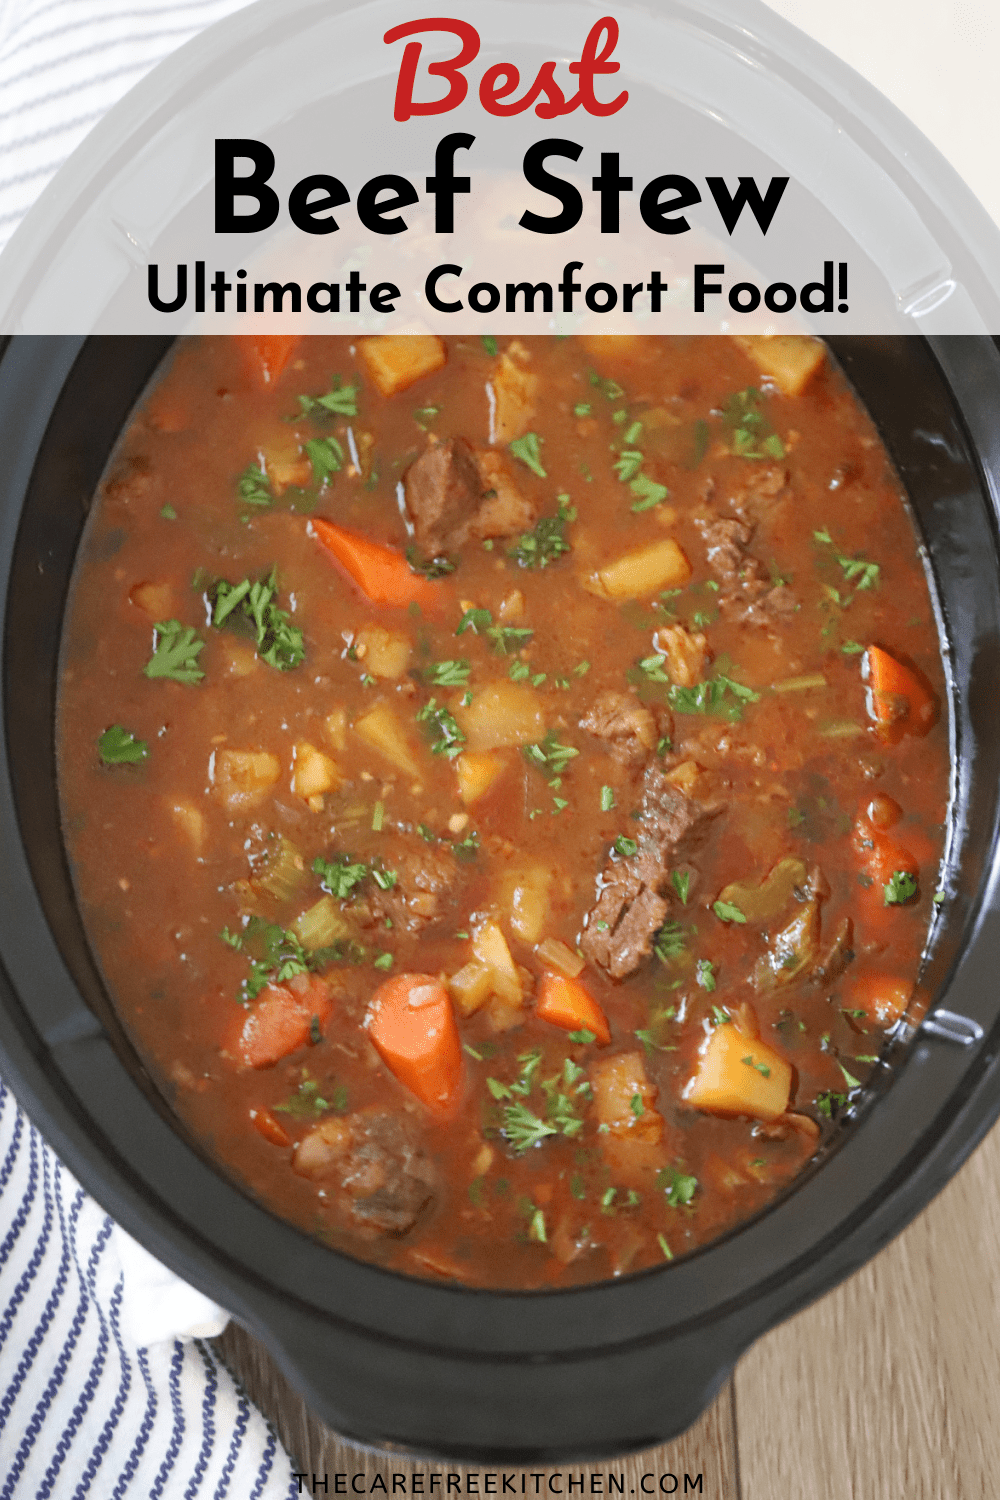 Homemade Beef Stew Recipe - The Carefree Kitchen